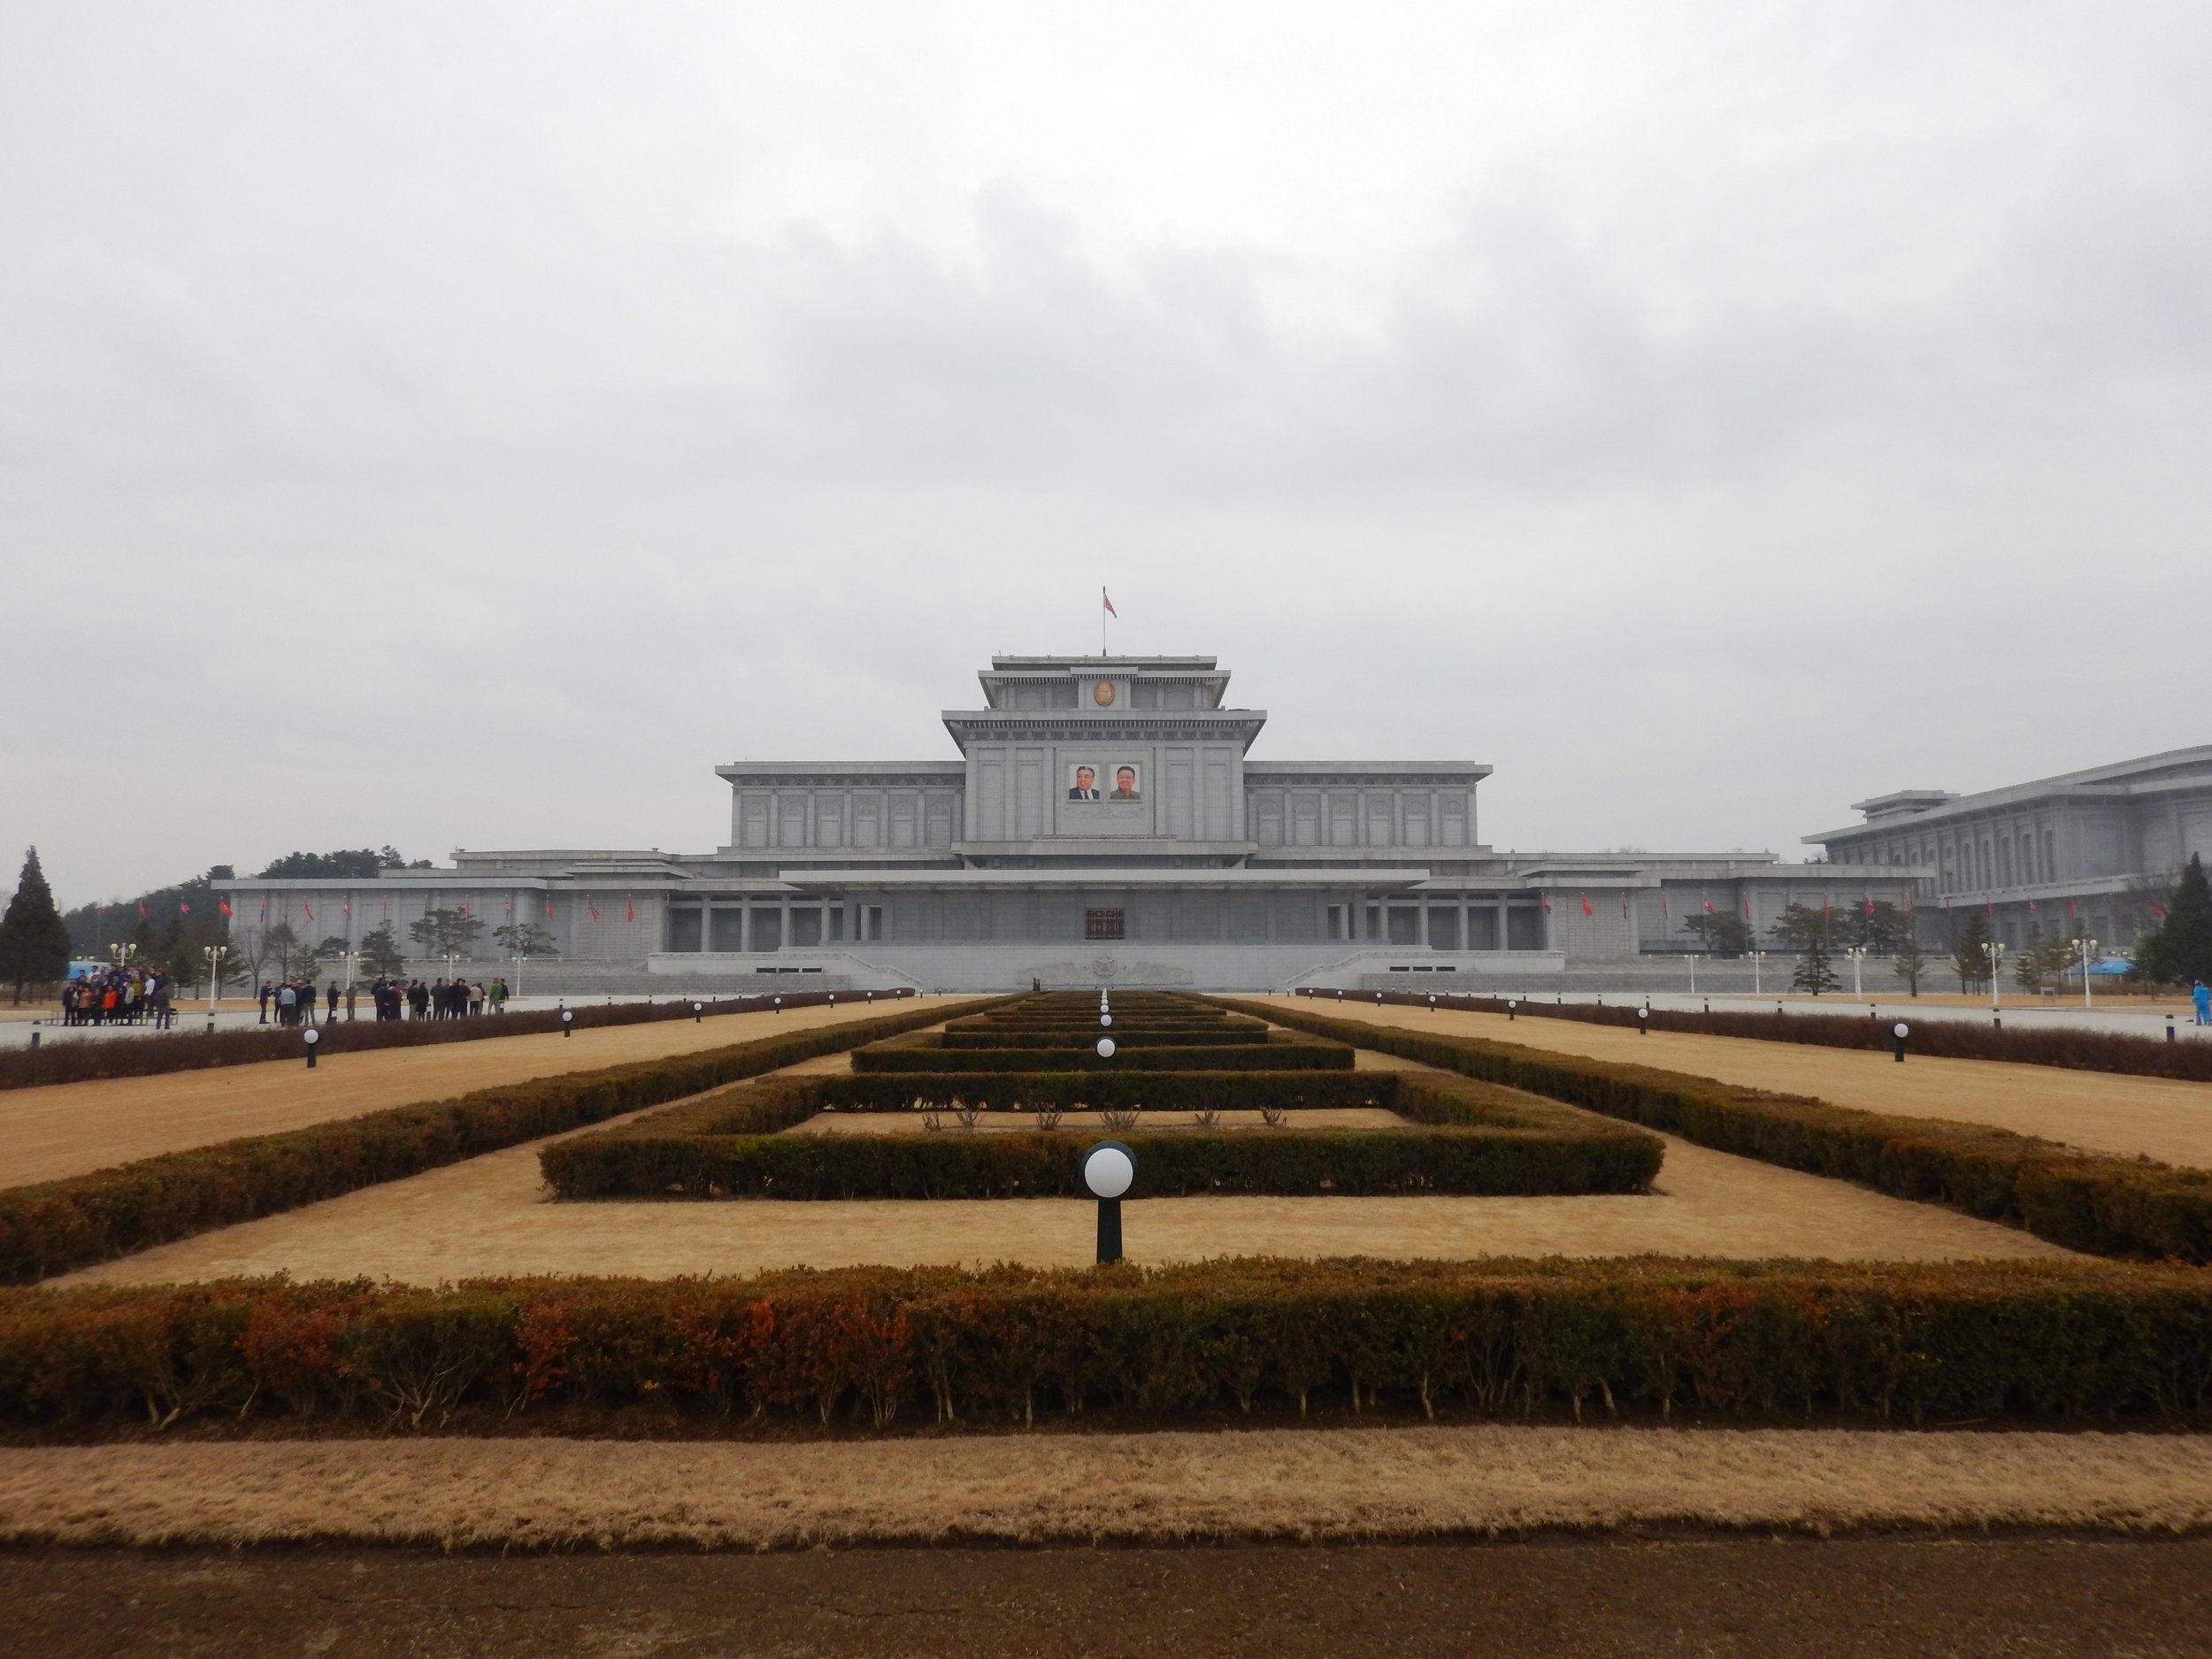  The Kumsusan Palace of the Sun, a massive concrete fortress north of the capital originally built as Kim Il-sung's primary residence, now served as a mausoleum housing the two deceased North Korean rulers. (Photo by Ethan Jakob Craft.) 